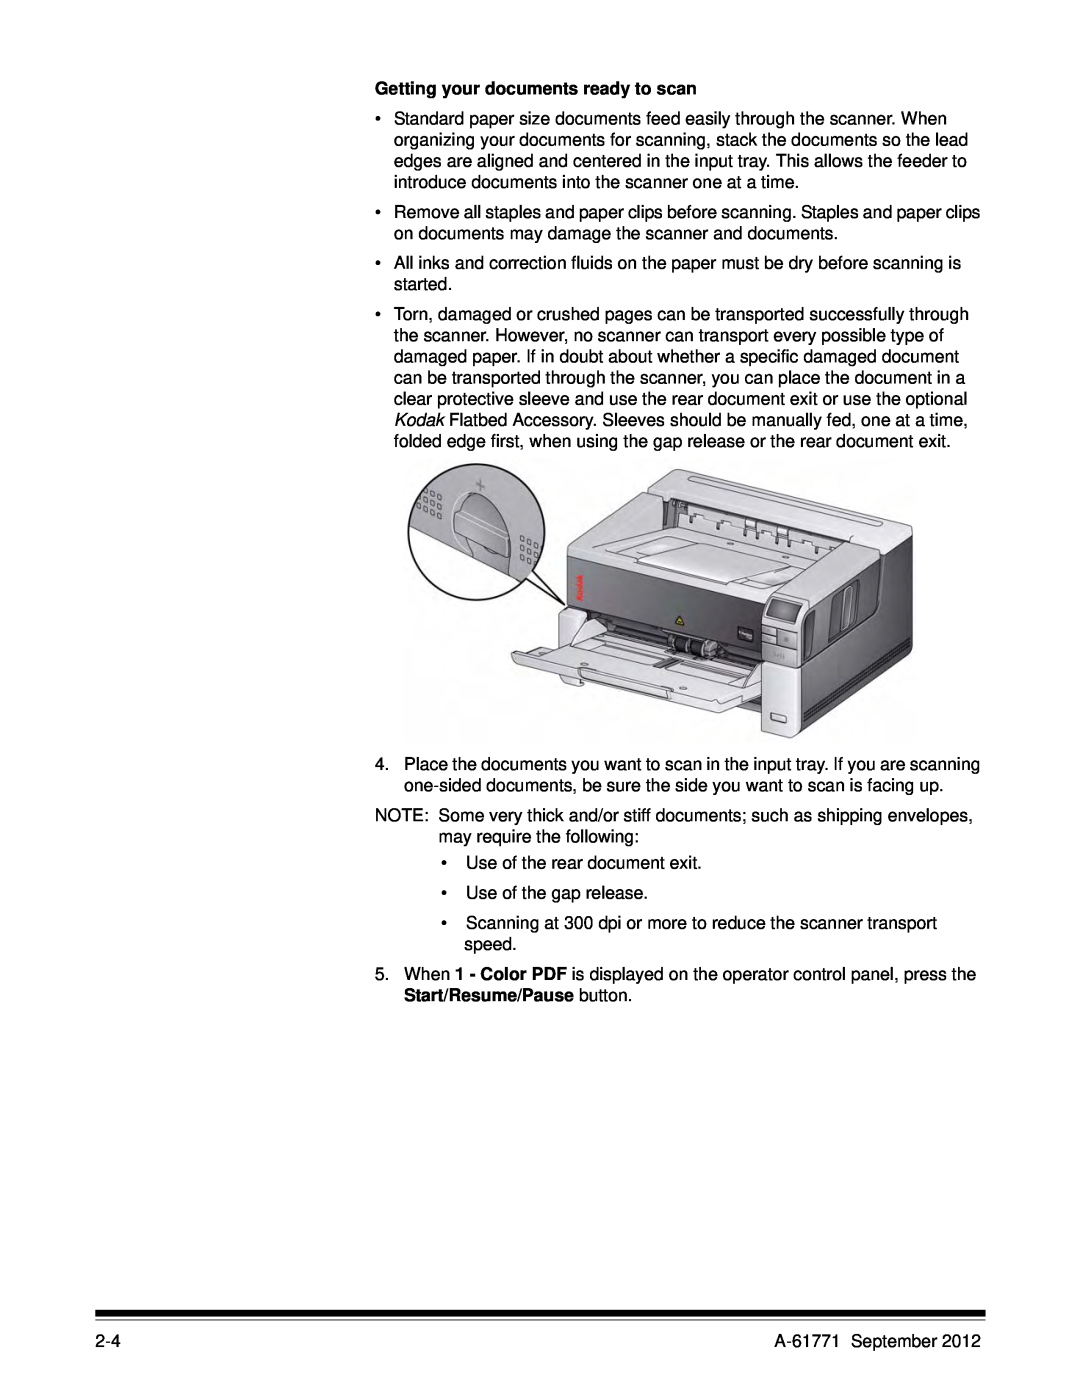 Kodak I3200, I3400 manual Getting your documents ready to scan 